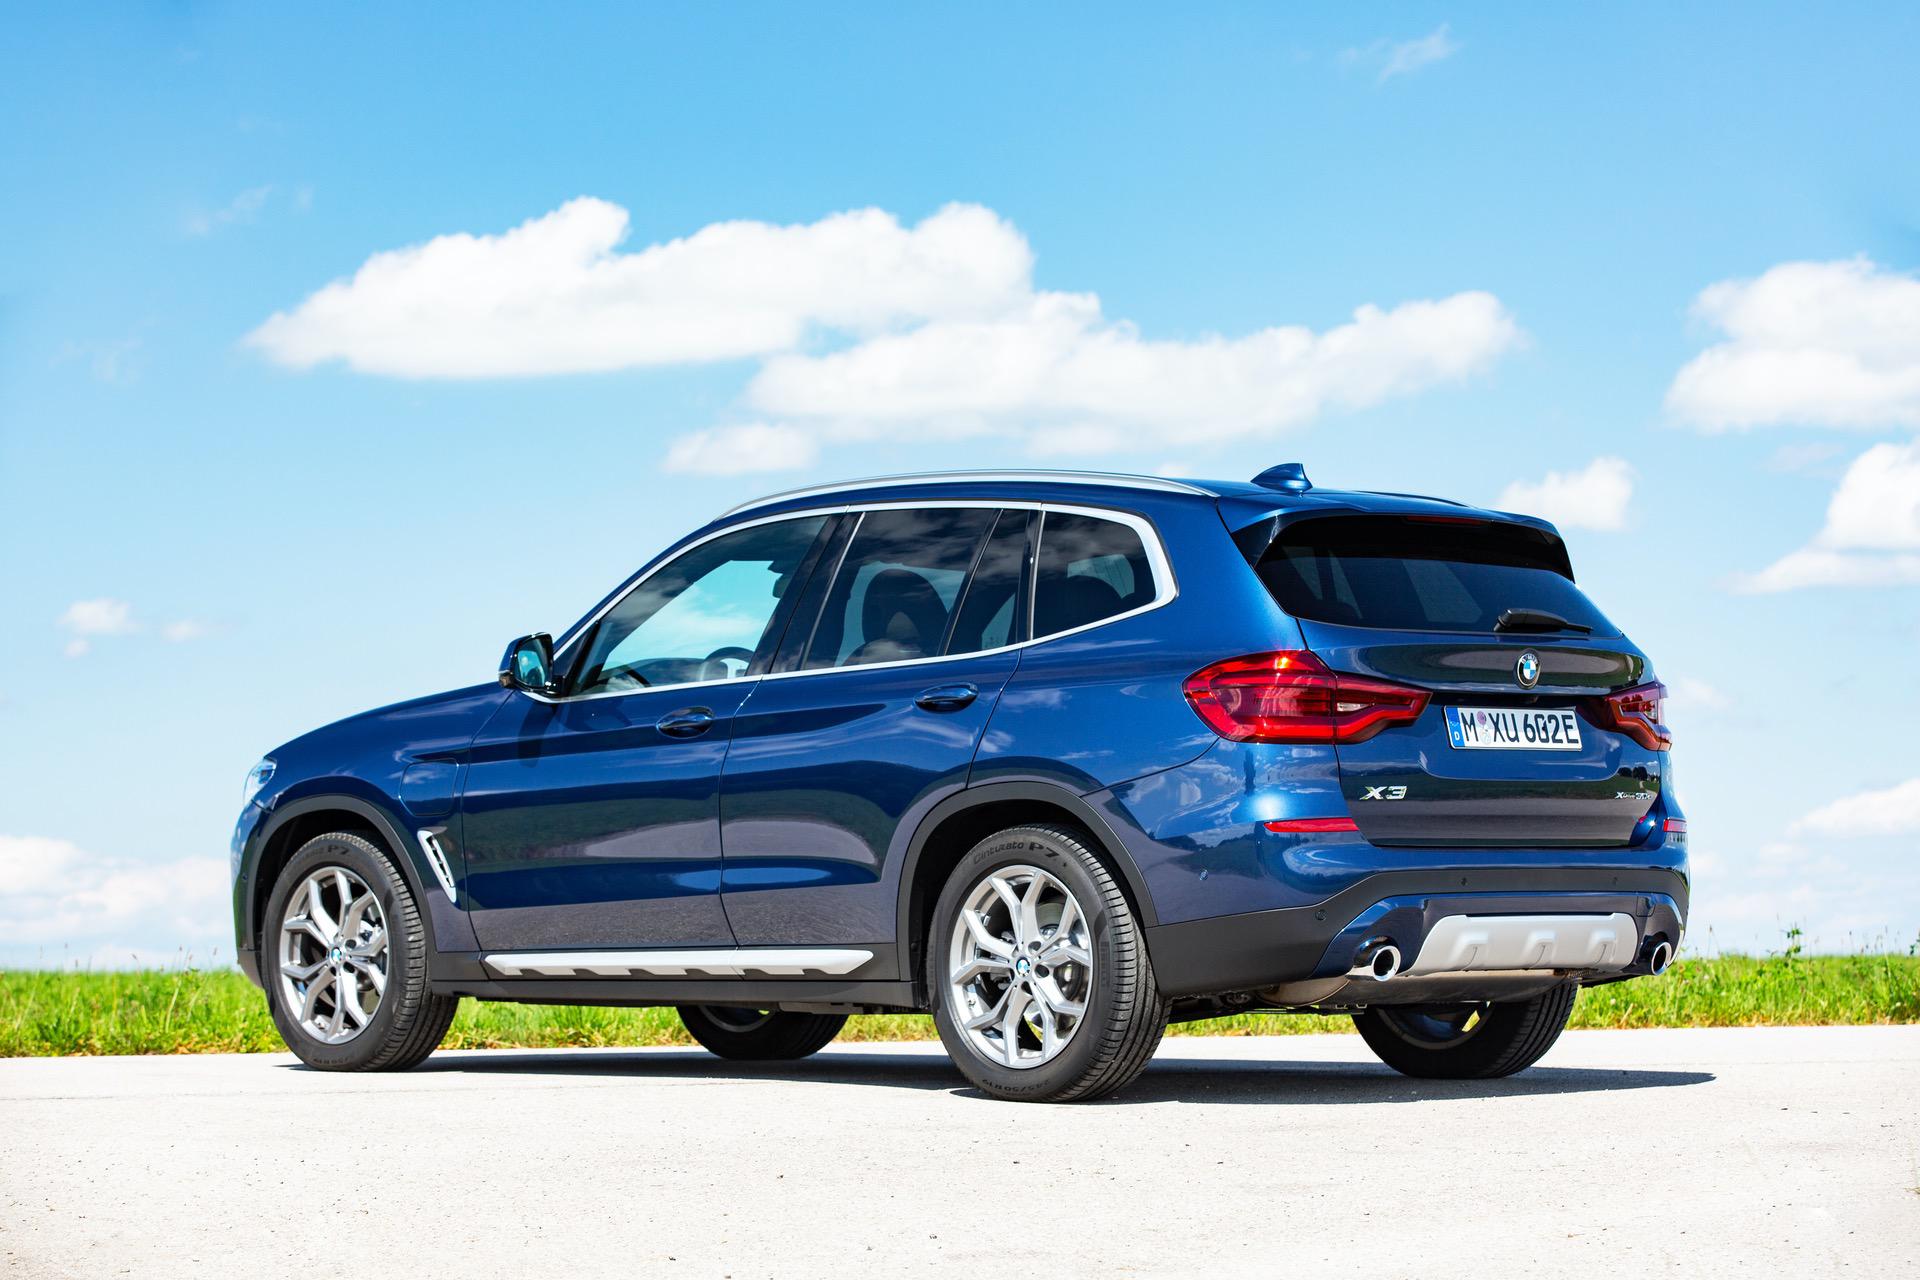 Video: BMW X3 tested against Audi Q5 and Volvo XC60 off-road